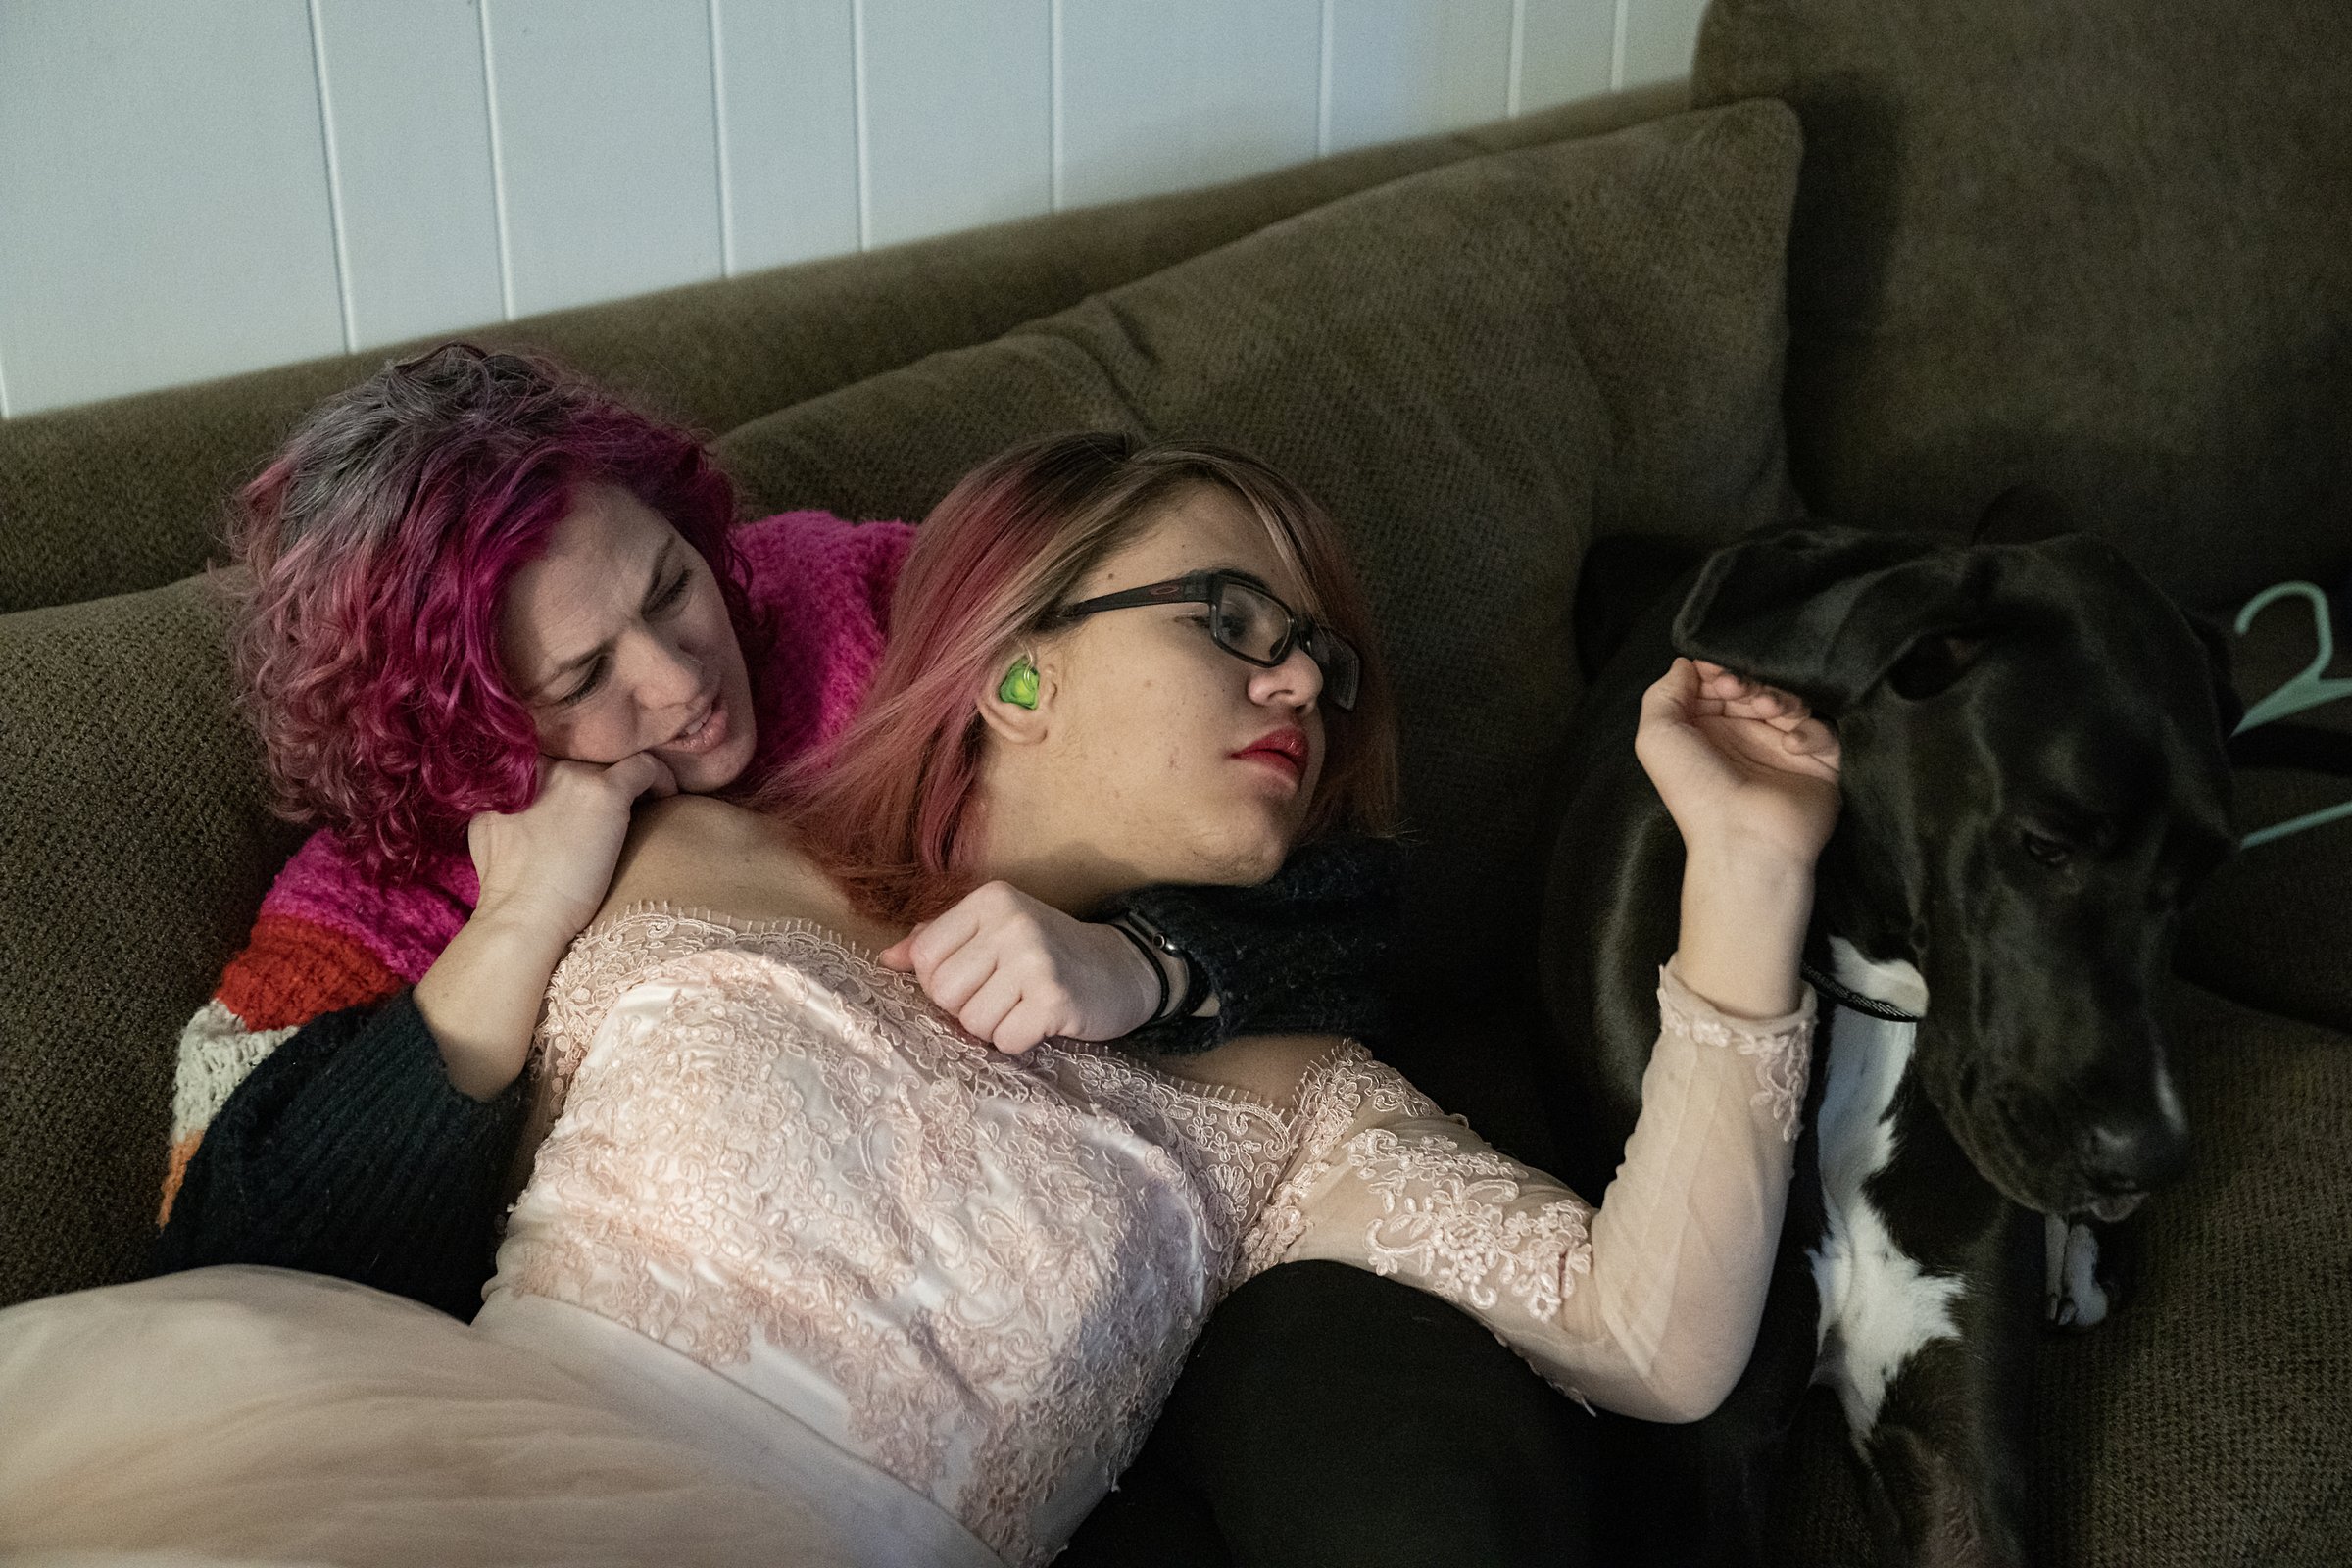  Chrissy Honig, her 14-year-old son Oliver and their dog Trixie sit together on the couch Thursday, Dec. 8, 2022, at his home in Westfield, Ind. "I just hope that he's always confident enough to just be who he is," Chrissy said. "And even though he c